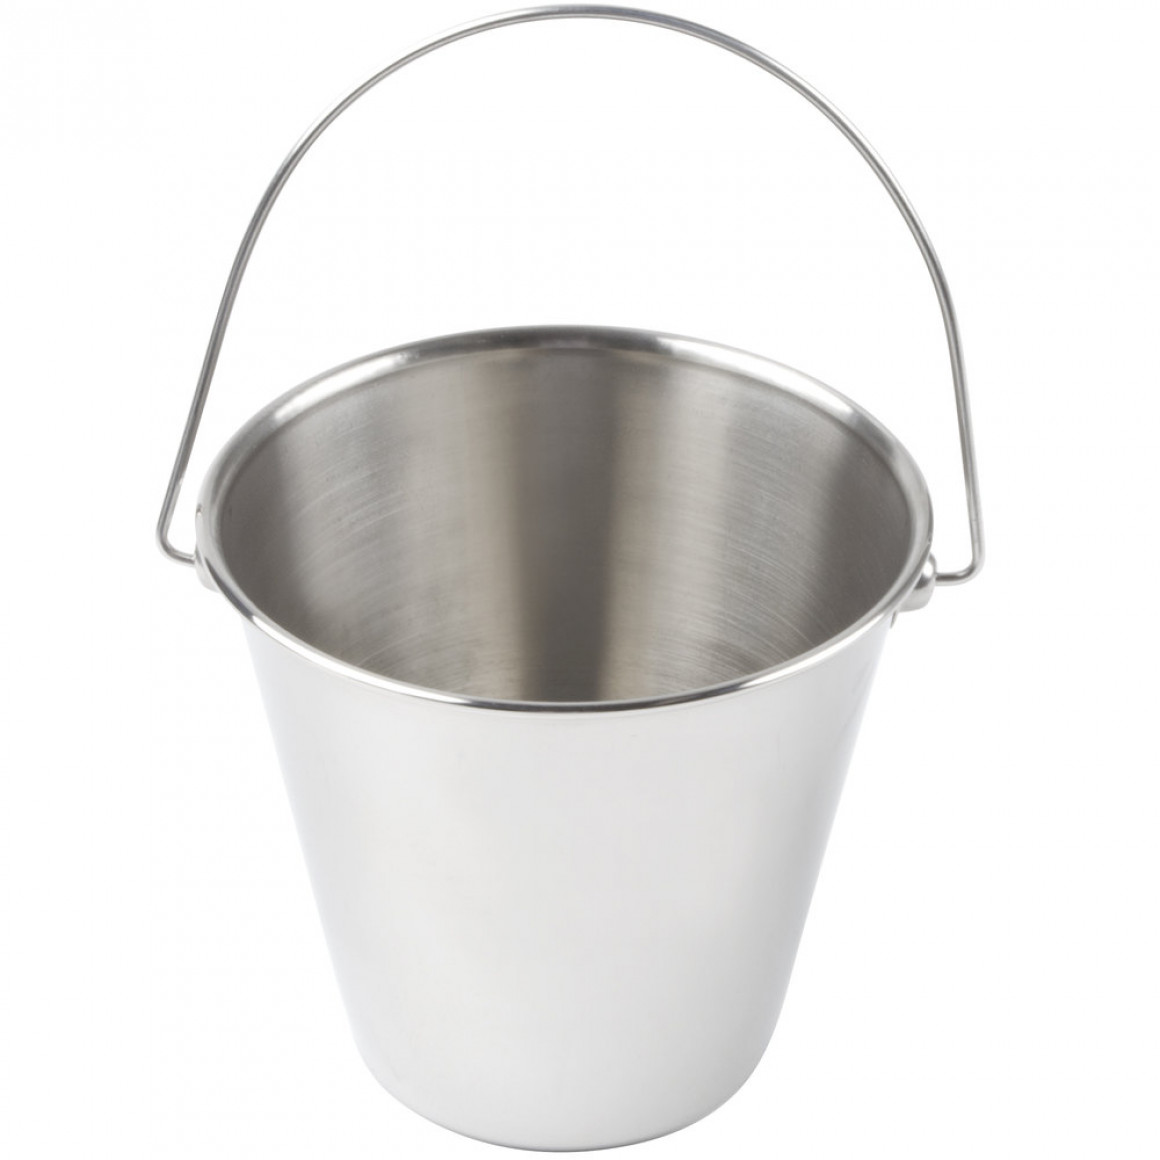 STAINLESS STEEL PAIL, 12 OZ.